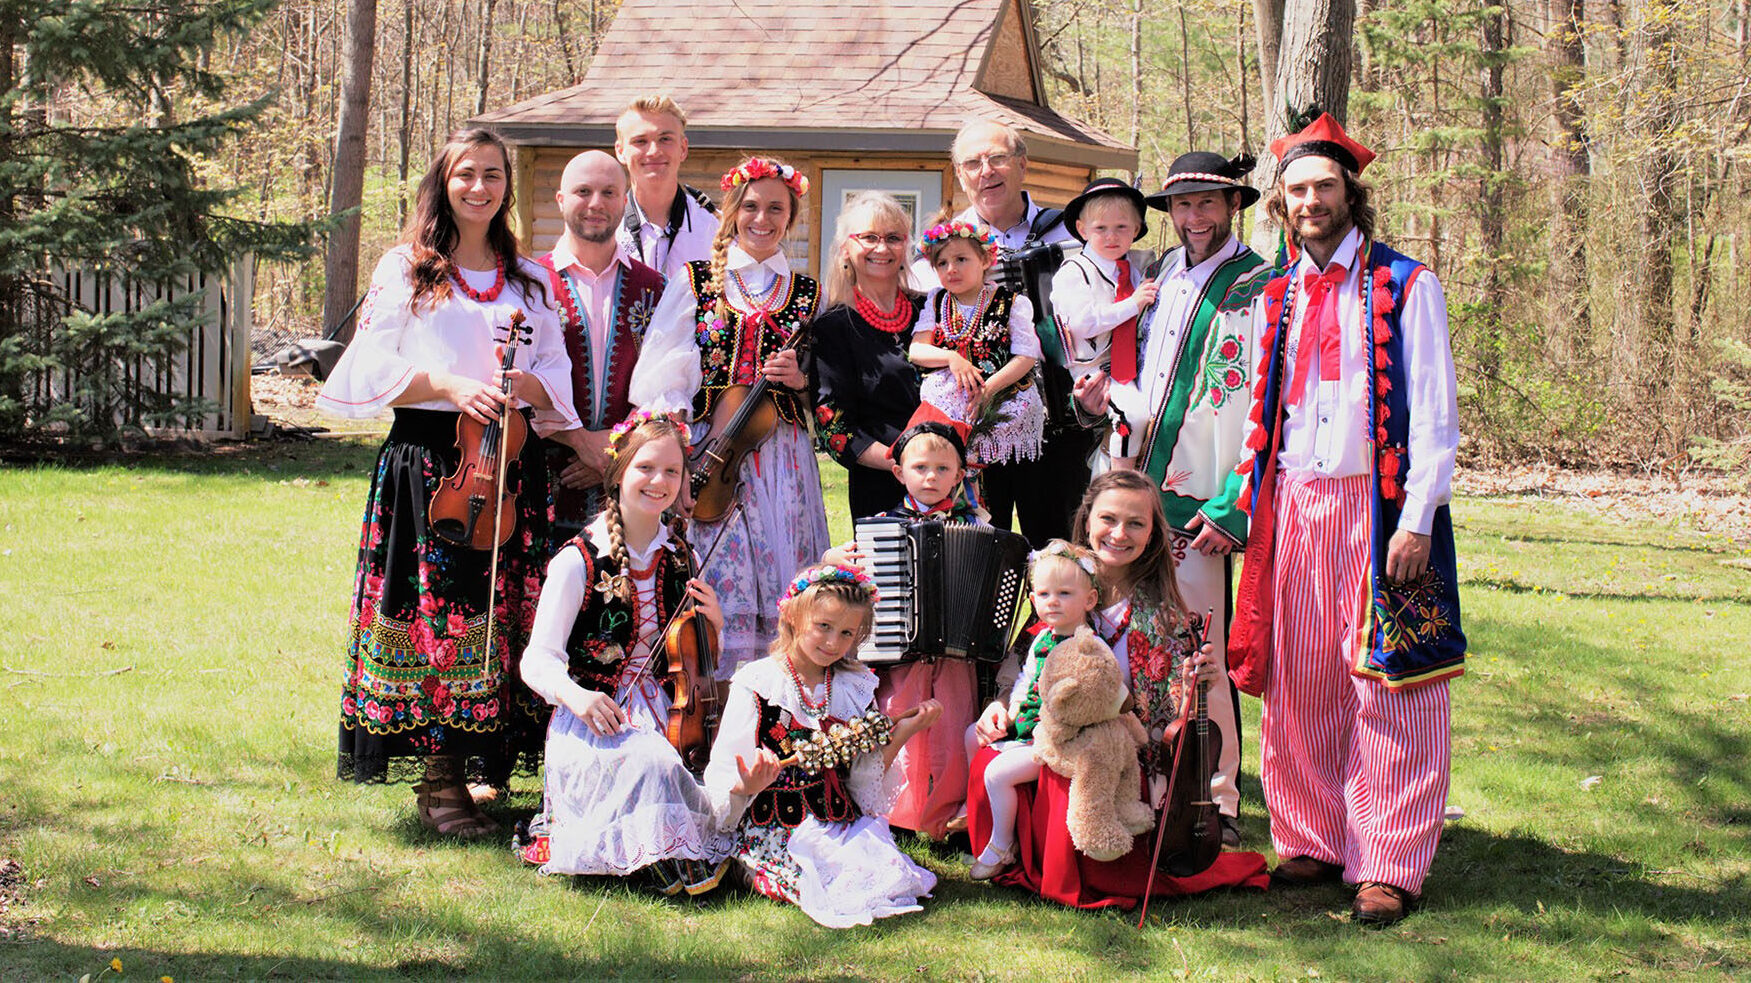 Pan Franek Polka Band members in traditional polka outfits with scenic woods in background